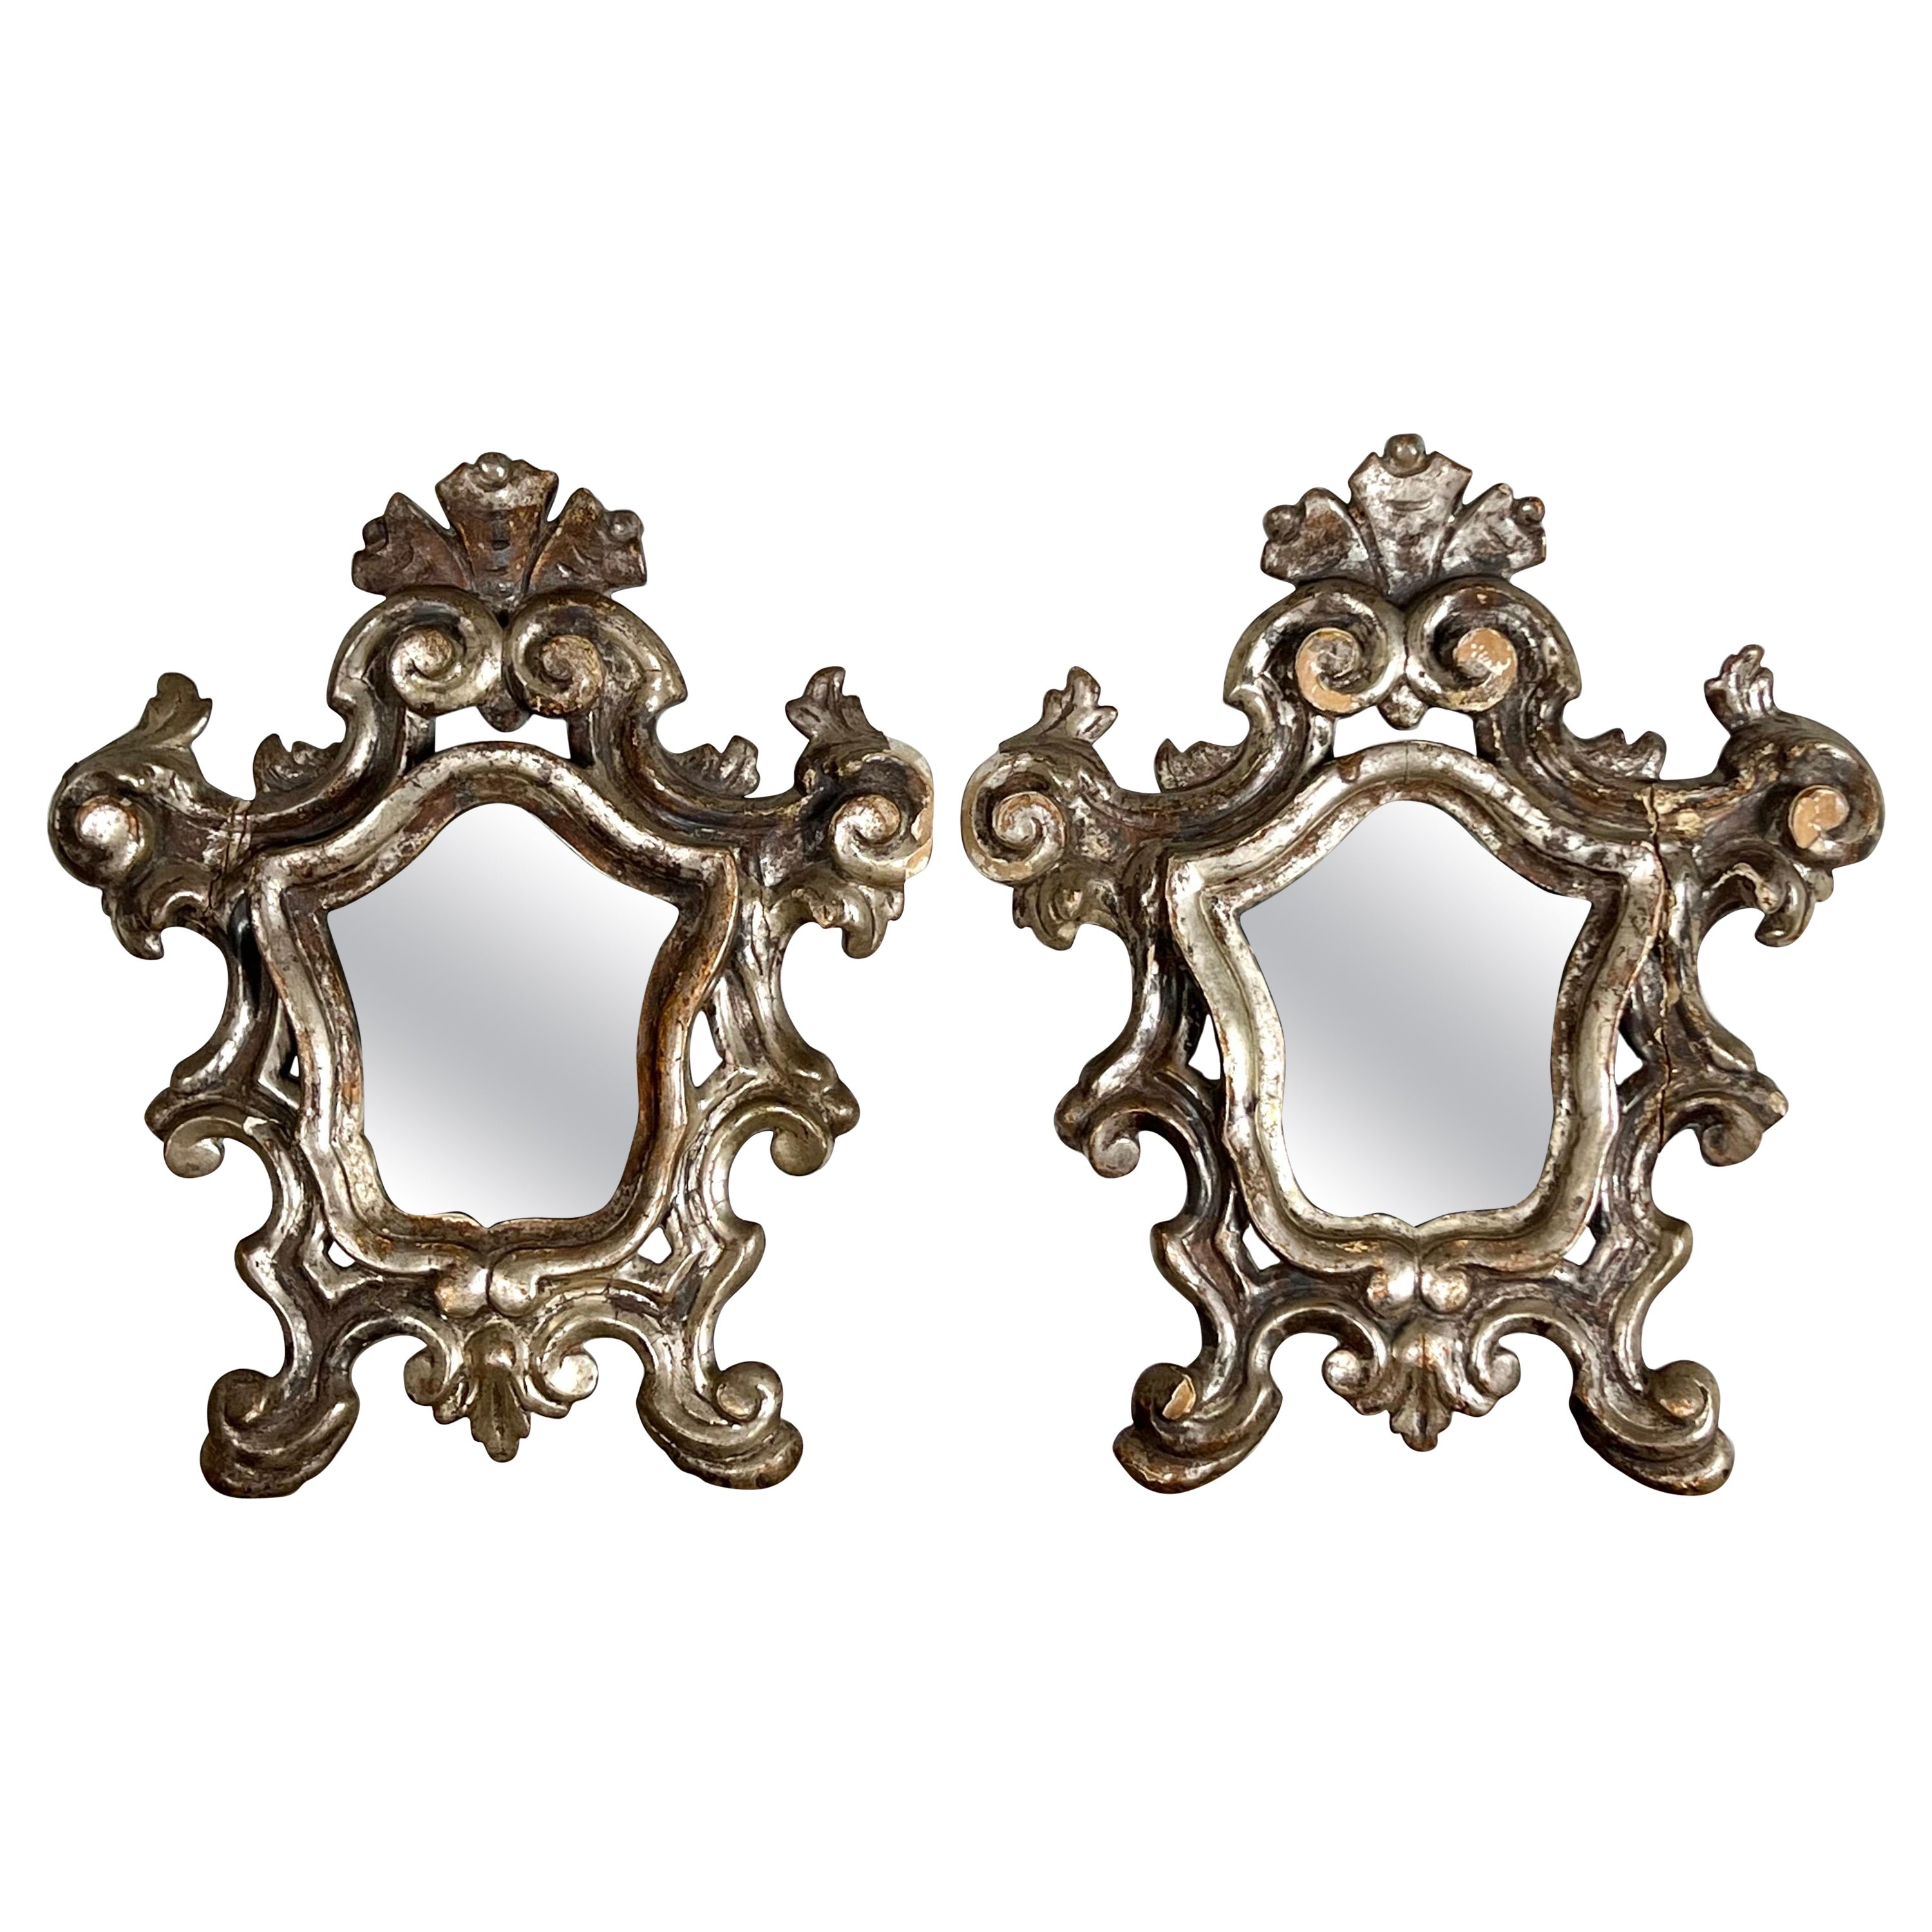 Pair of Italian Scrolled Silver Leaf Baroque Style Mirrors